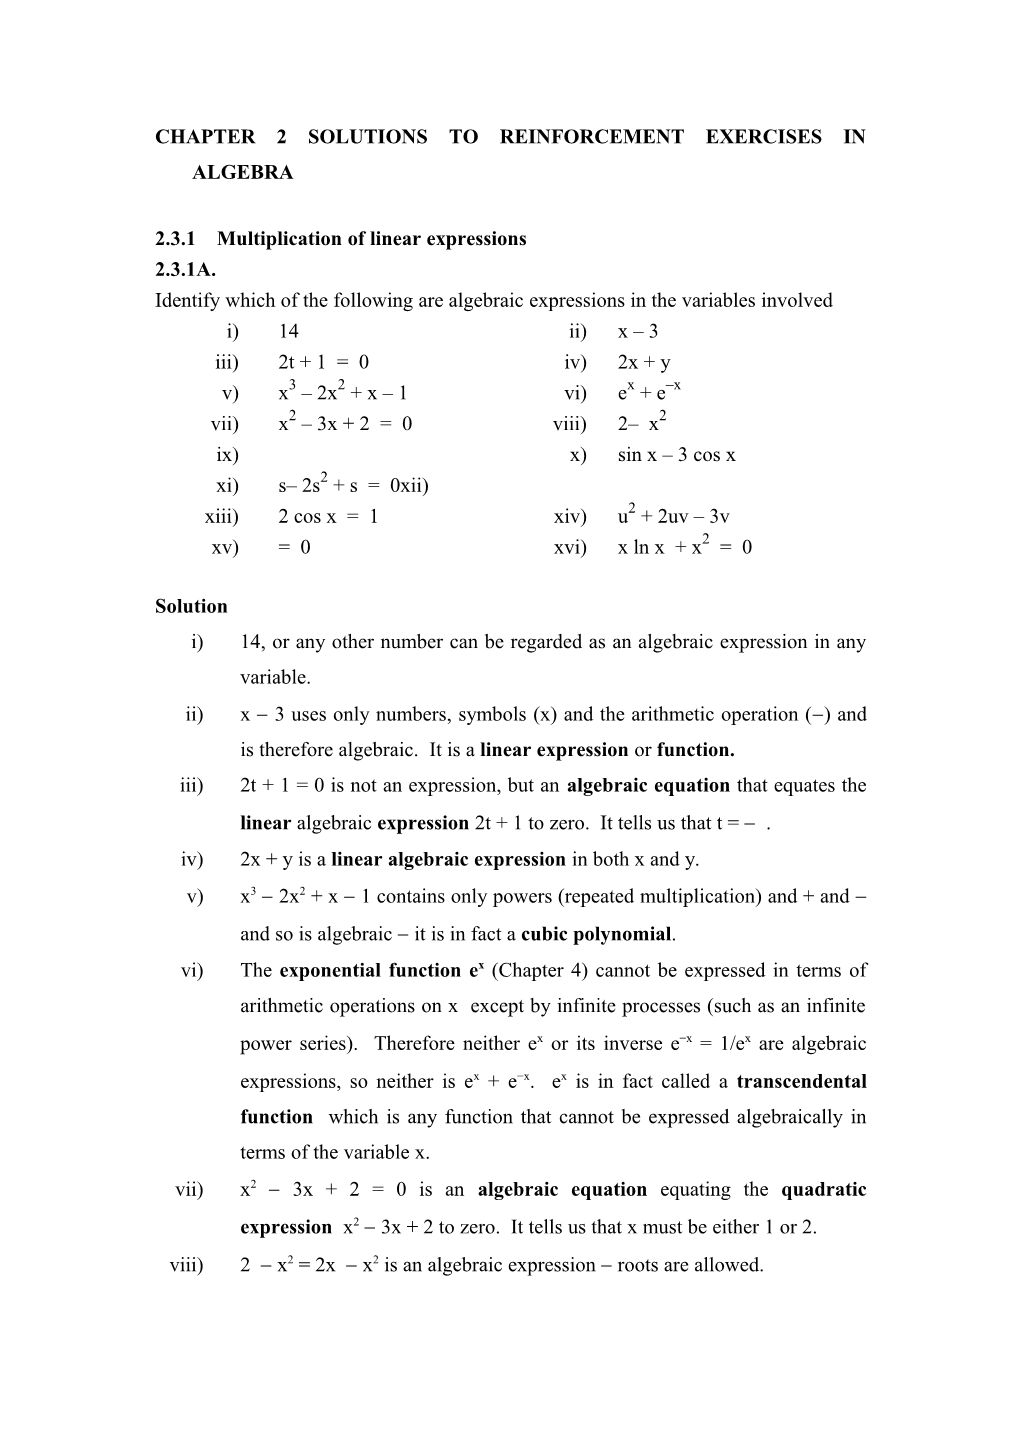 Chapter 2 Solutions to Reinforcement Exercises in Algebra